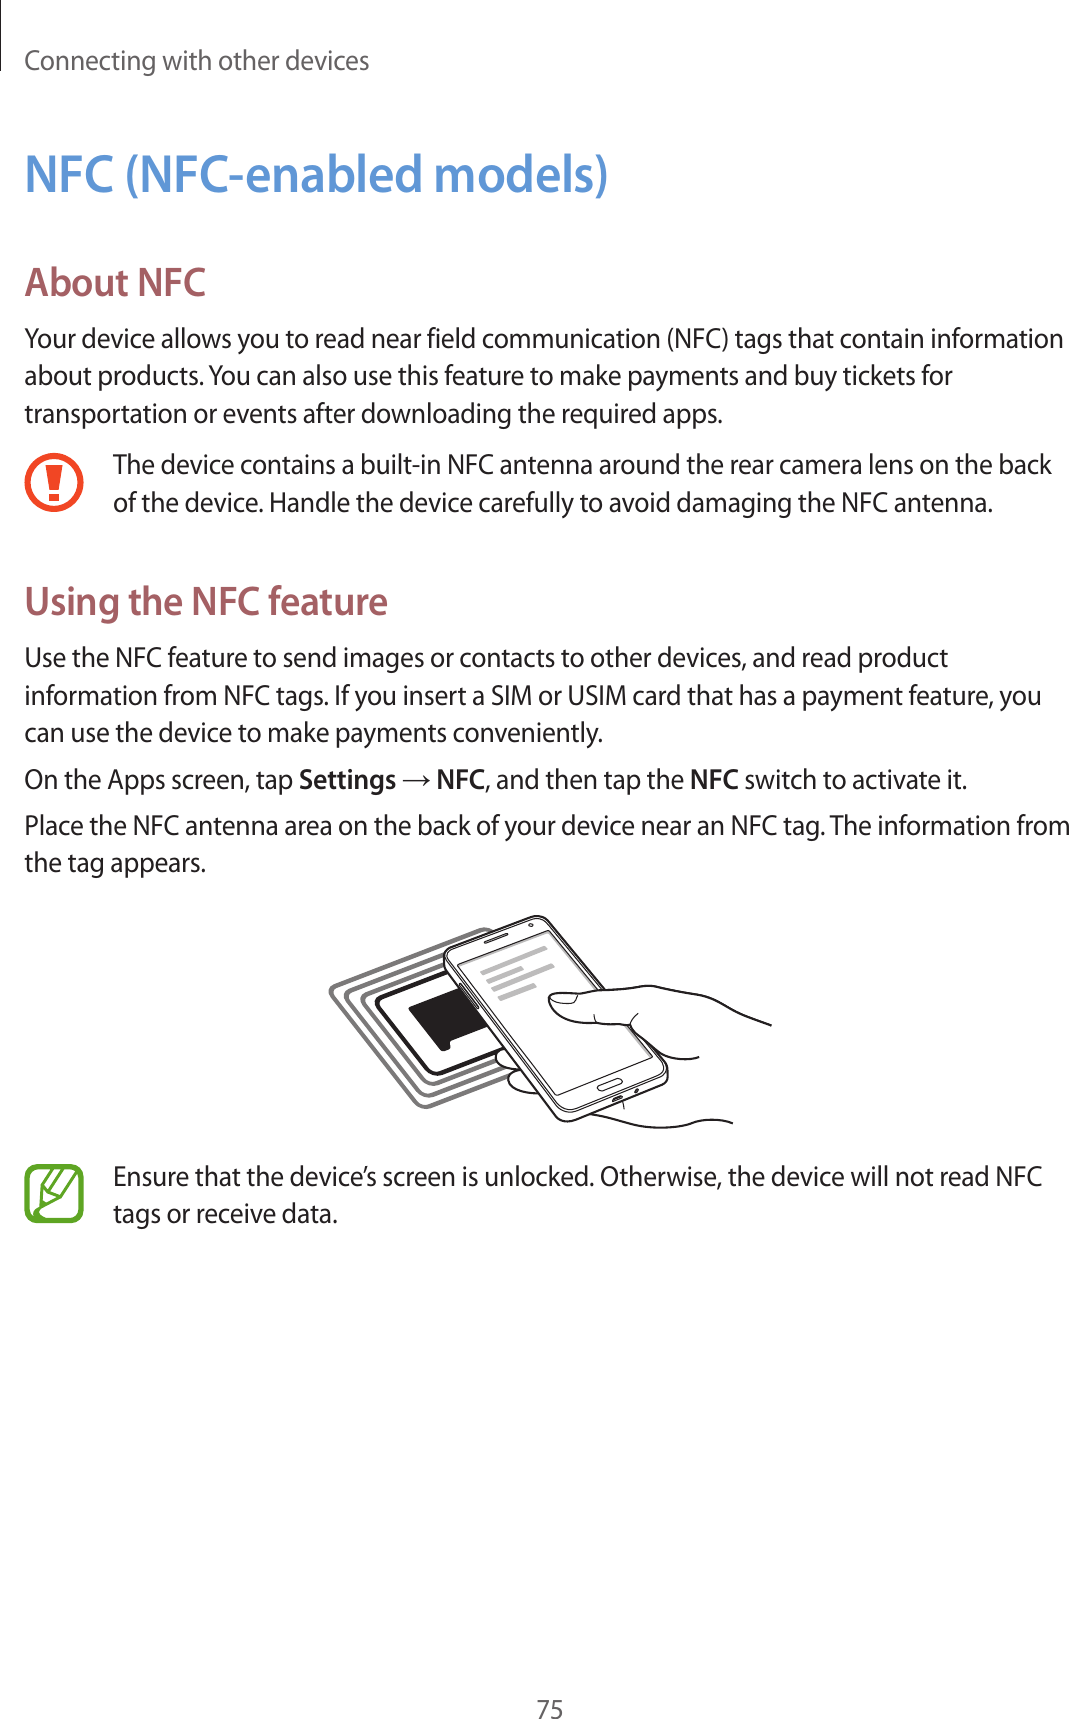 Connecting with other devices75NFC (NFC-enabled models)About NFCYour device allows you to read near field communication (NFC) tags that contain information about products. You can also use this feature to make payments and buy tickets for transportation or events after downloading the required apps.The device contains a built-in NFC antenna around the rear camera lens on the back of the device. Handle the device carefully to avoid damaging the NFC antenna.Using the NFC featureUse the NFC feature to send images or contacts to other devices, and read product information from NFC tags. If you insert a SIM or USIM card that has a payment feature, you can use the device to make payments conveniently.On the Apps screen, tap Settings → NFC, and then tap the NFC switch to activate it.Place the NFC antenna area on the back of your device near an NFC tag. The information from the tag appears.Ensure that the device’s screen is unlocked. Otherwise, the device will not read NFC tags or receive data.